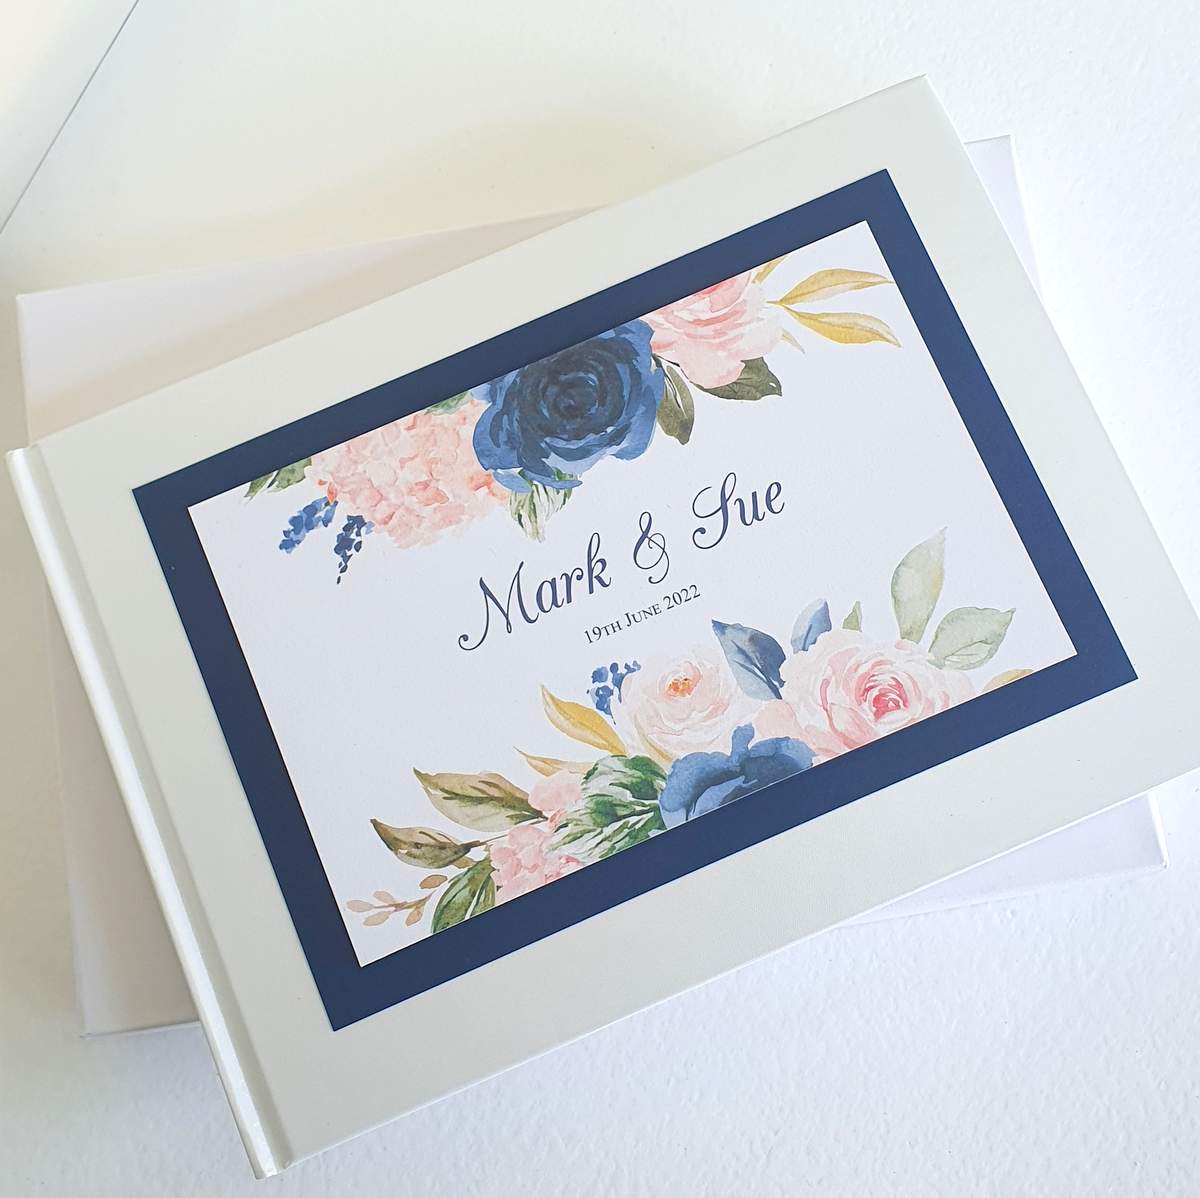 wedding guest book personalised with the bride and grooms names and a navy and blush floral design